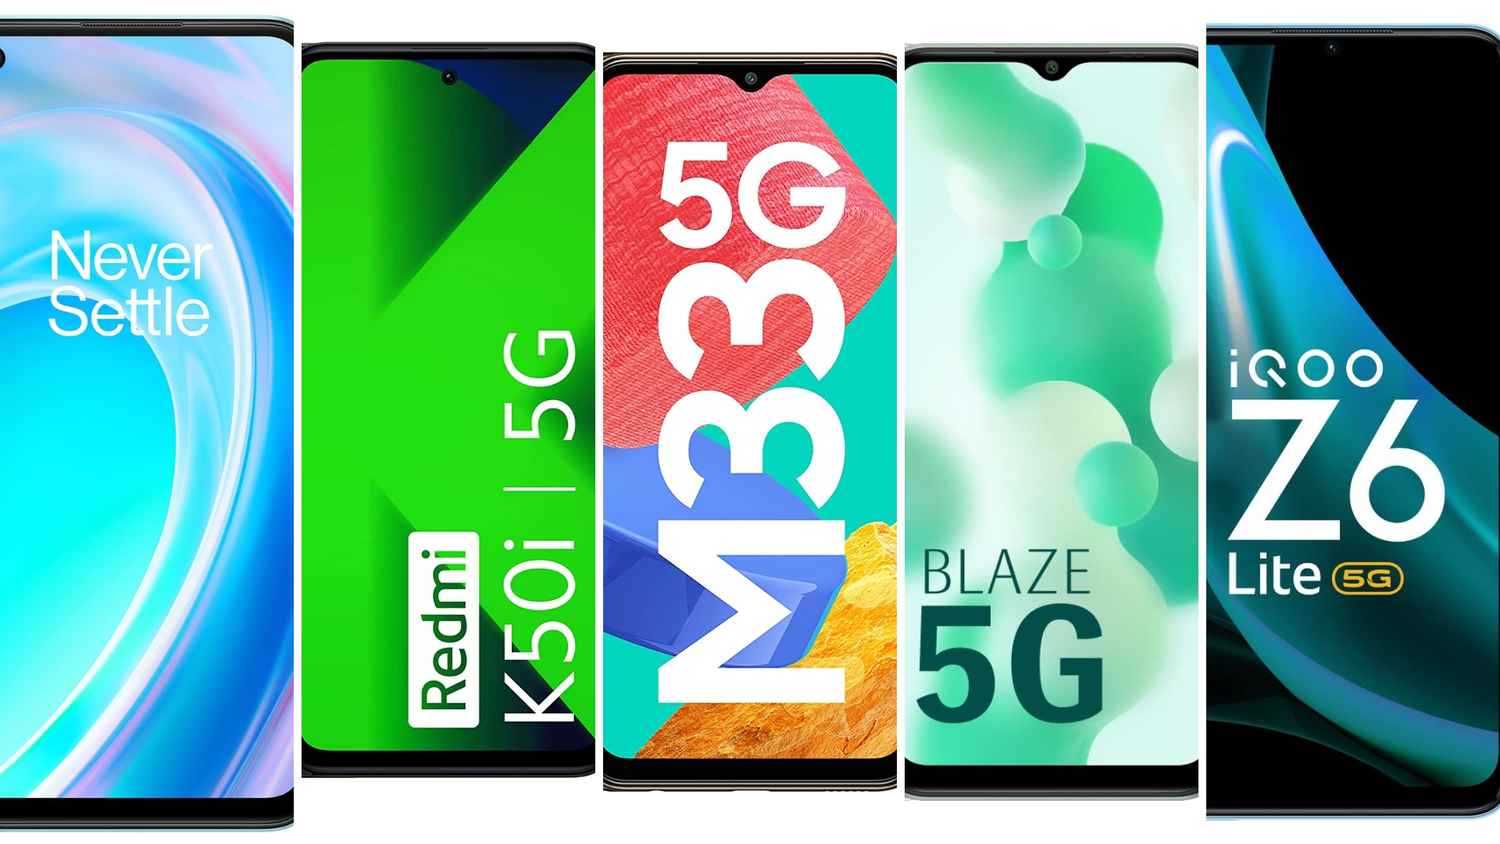 5 incredibly affordable 5G smartphone deals on Amazon India awaiting you